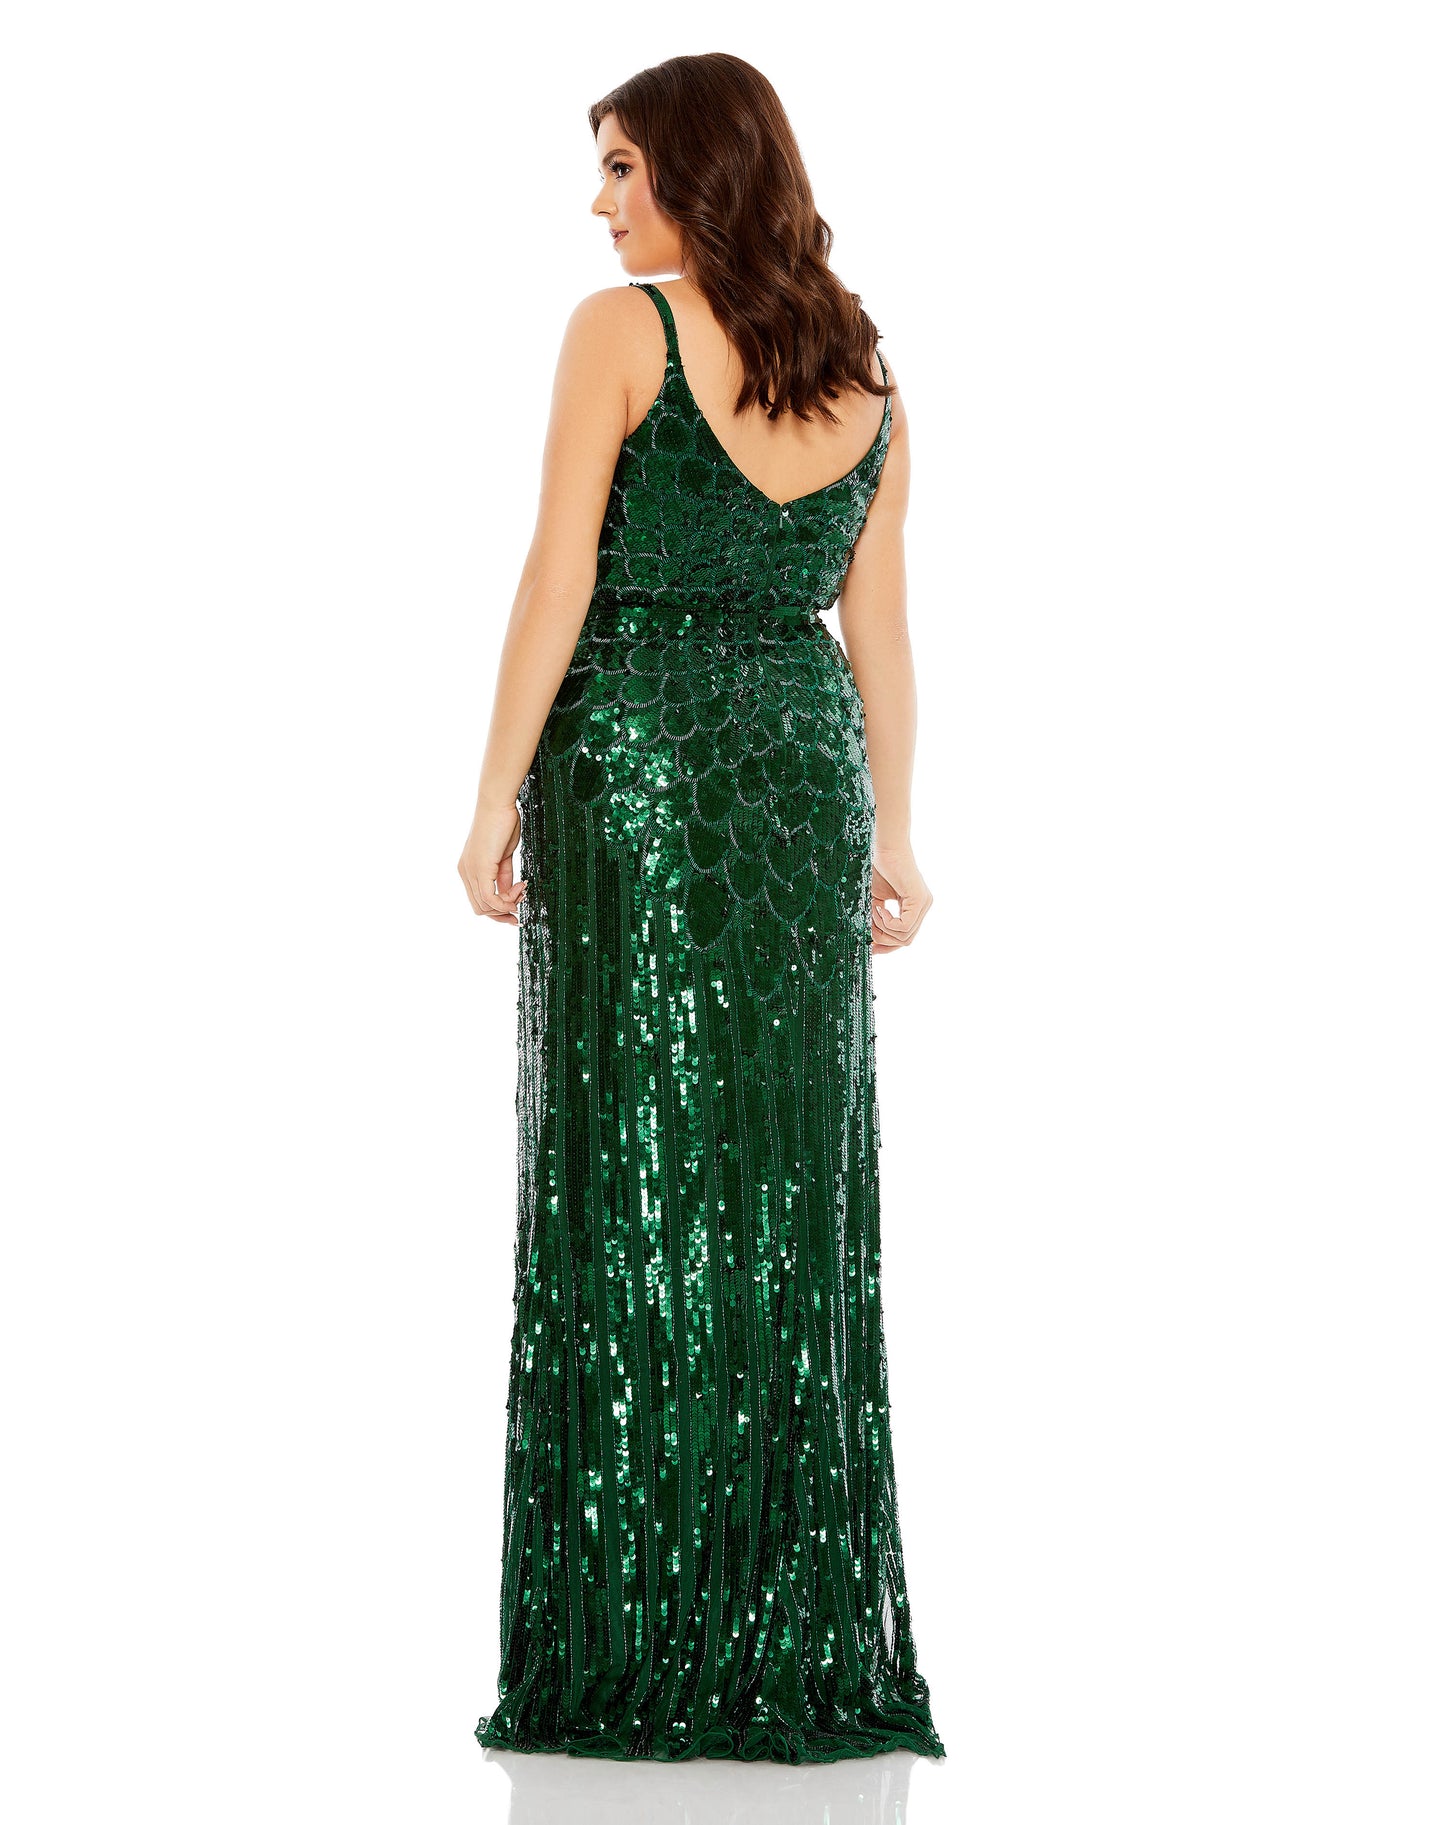 Sequined Spaghetti Strap Trumpet Gown